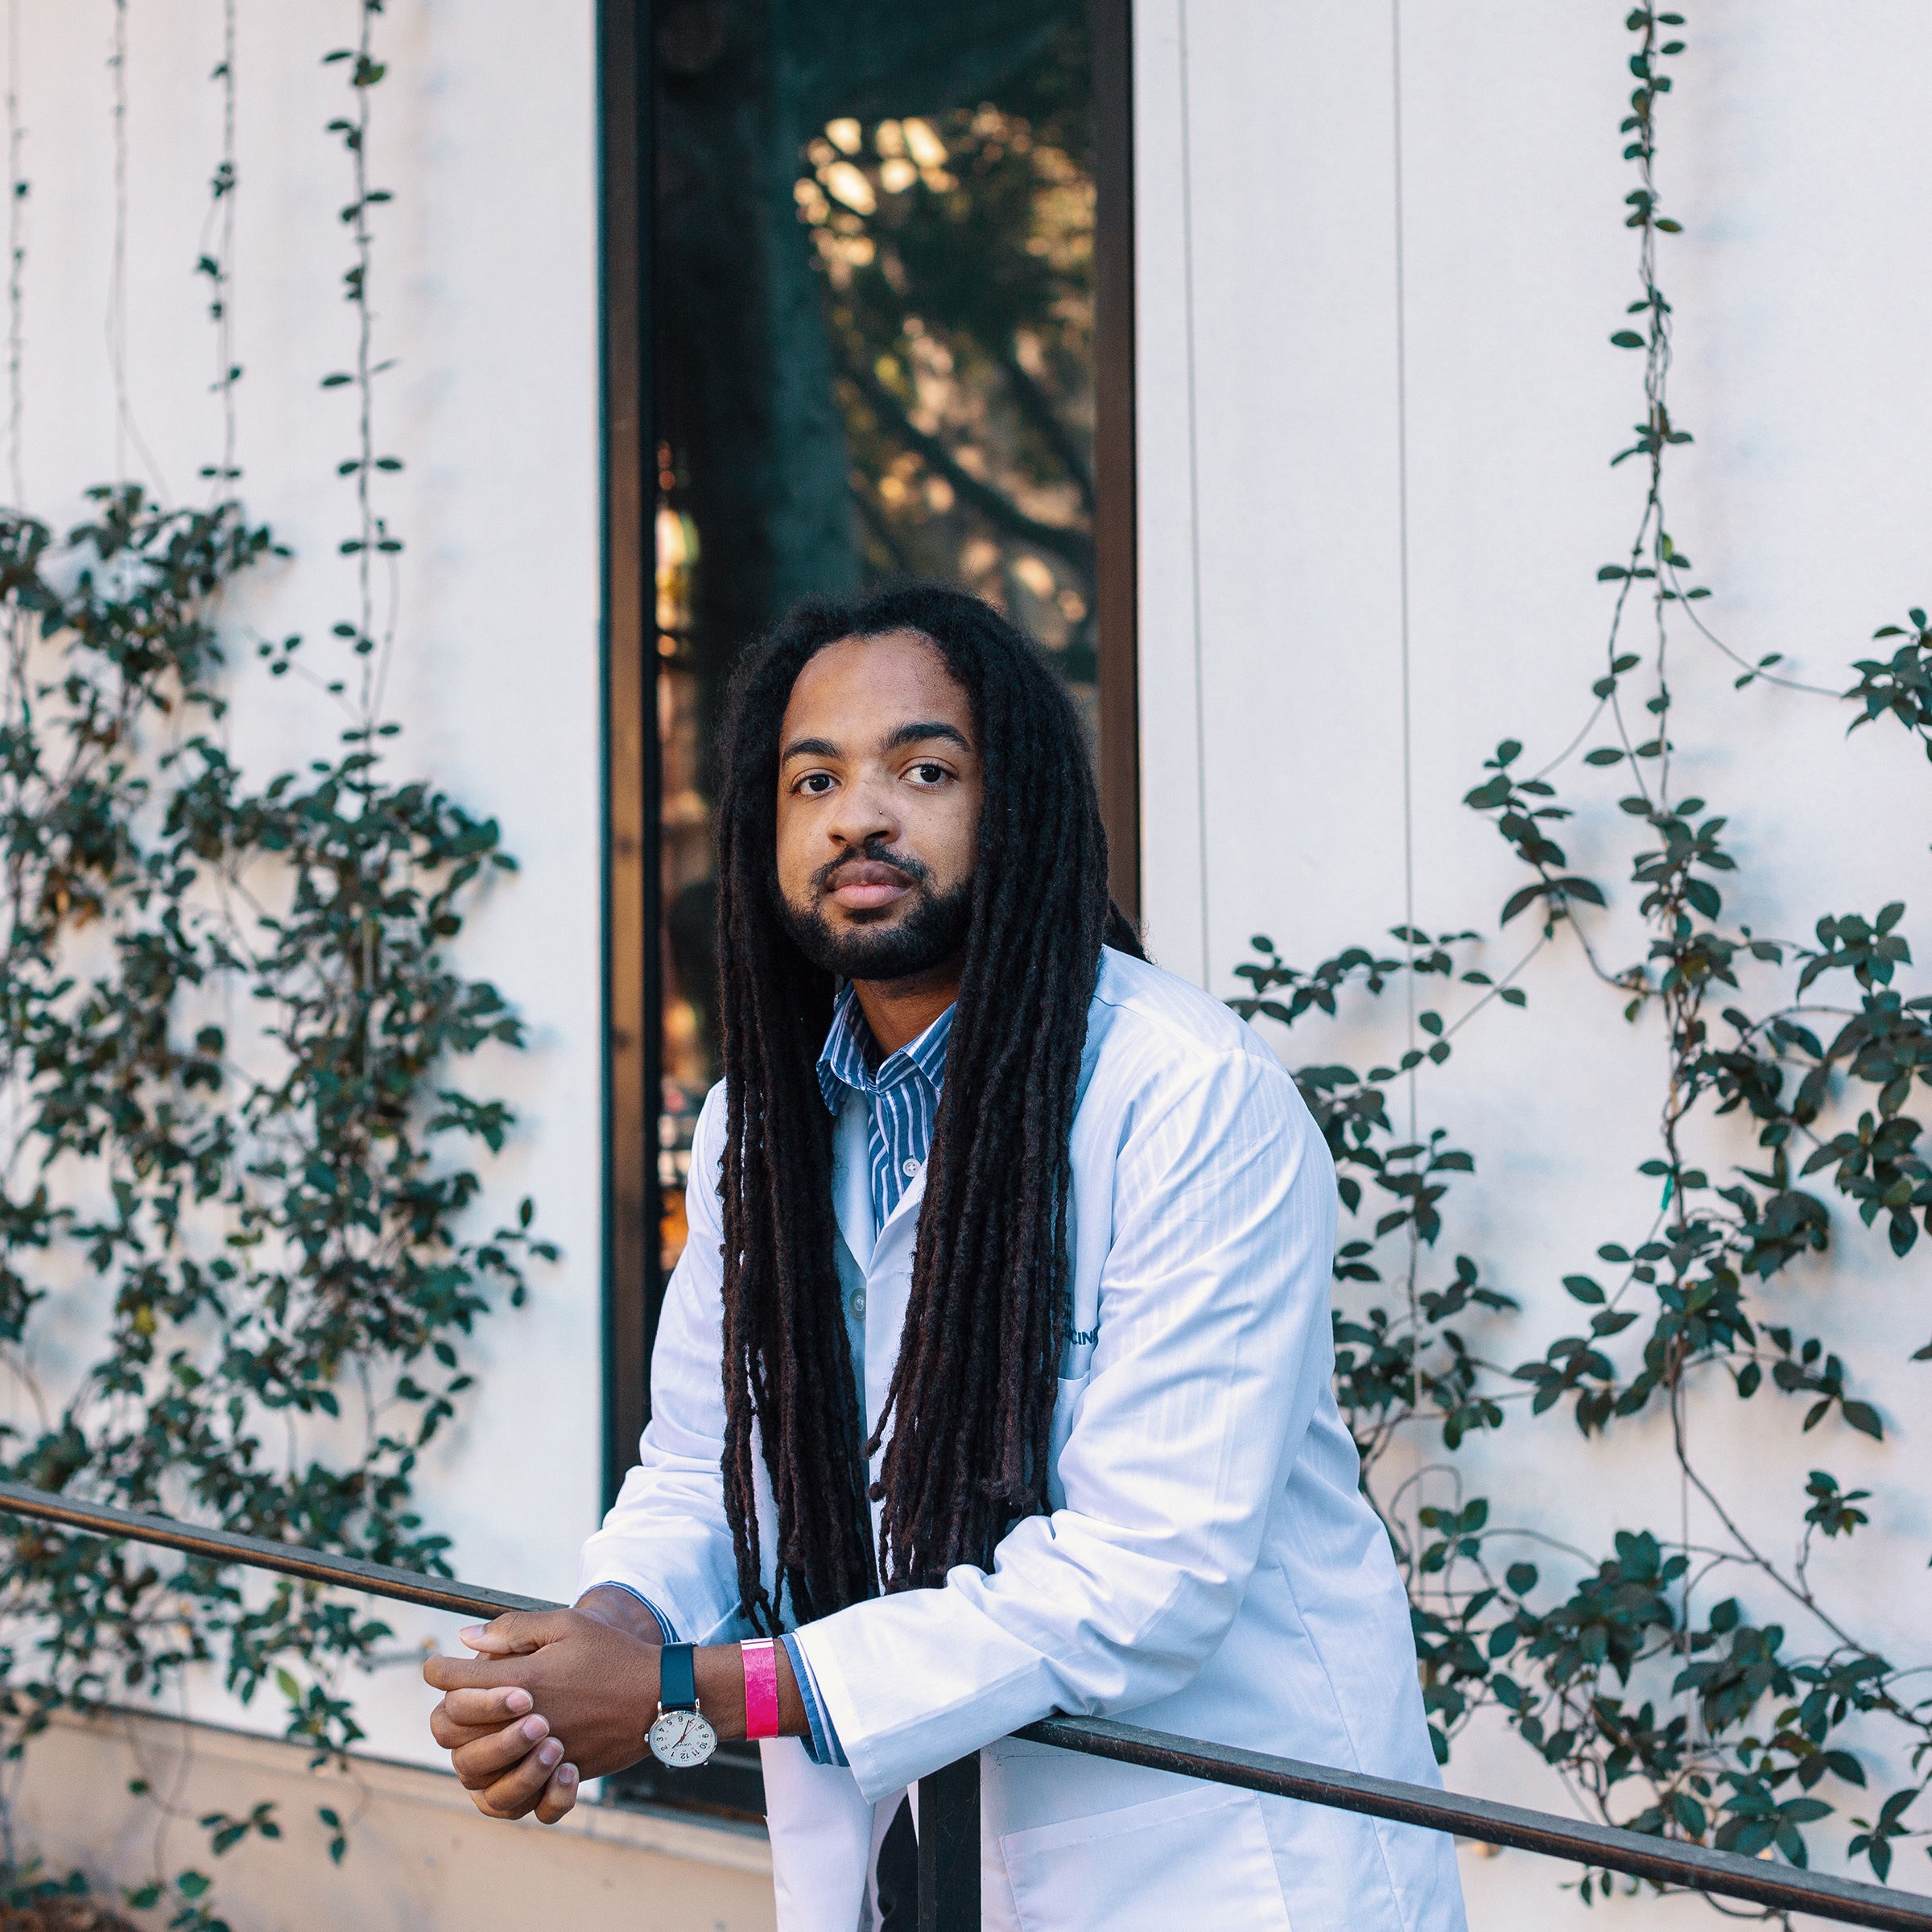 Cruz Riley, a first-year student at Kaiser Permanente's new medical school, is photographed on campus in Pasadena, Calif., in November. (Bethany Mollenkof for TIME)